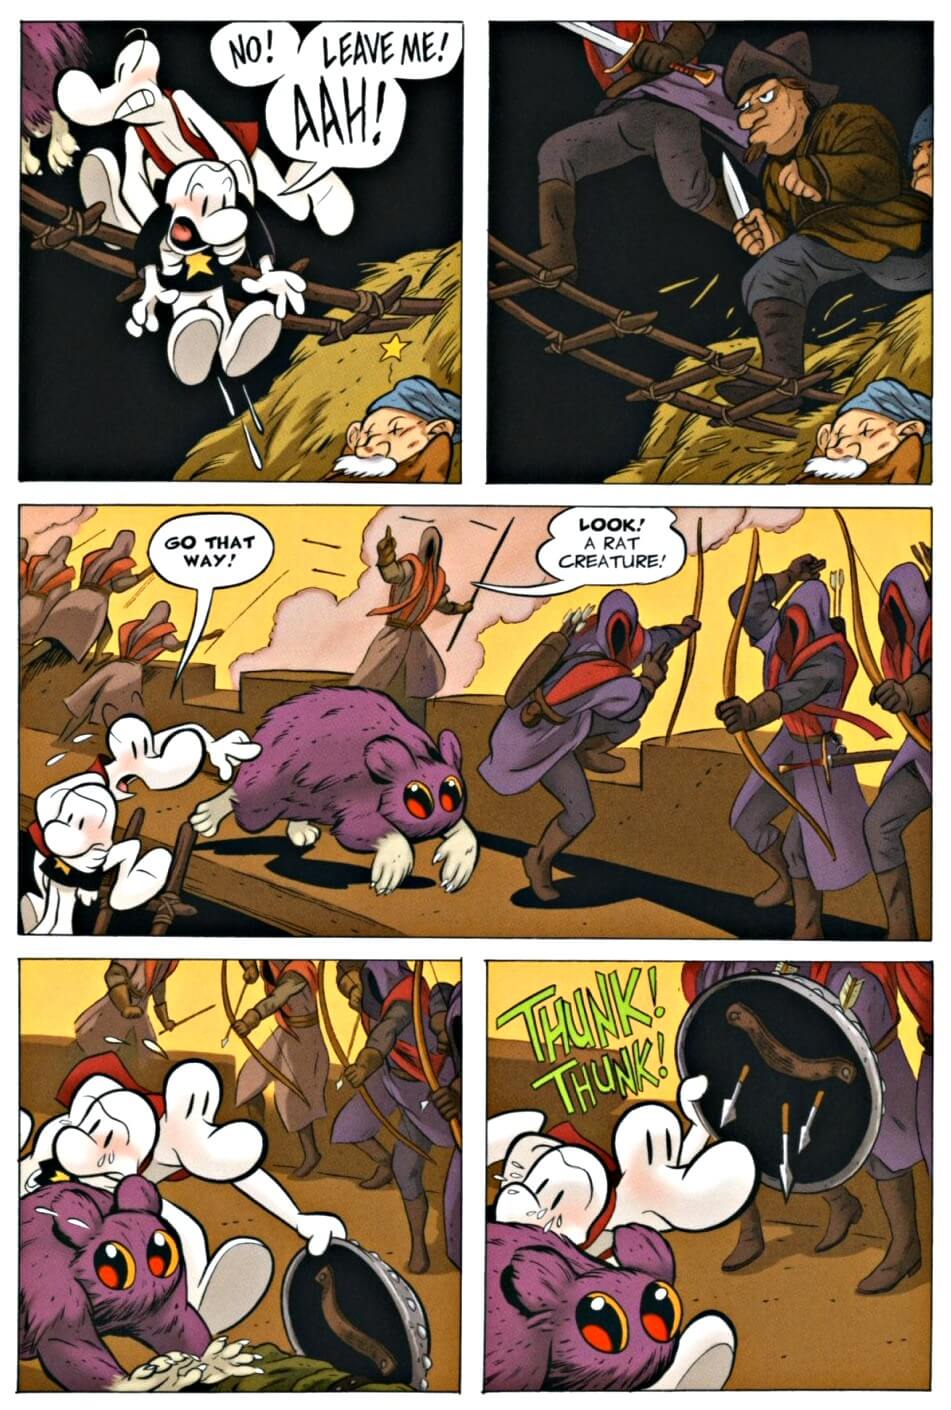 page 78 chapter 3 of bone 9 crown of horns graphic novel